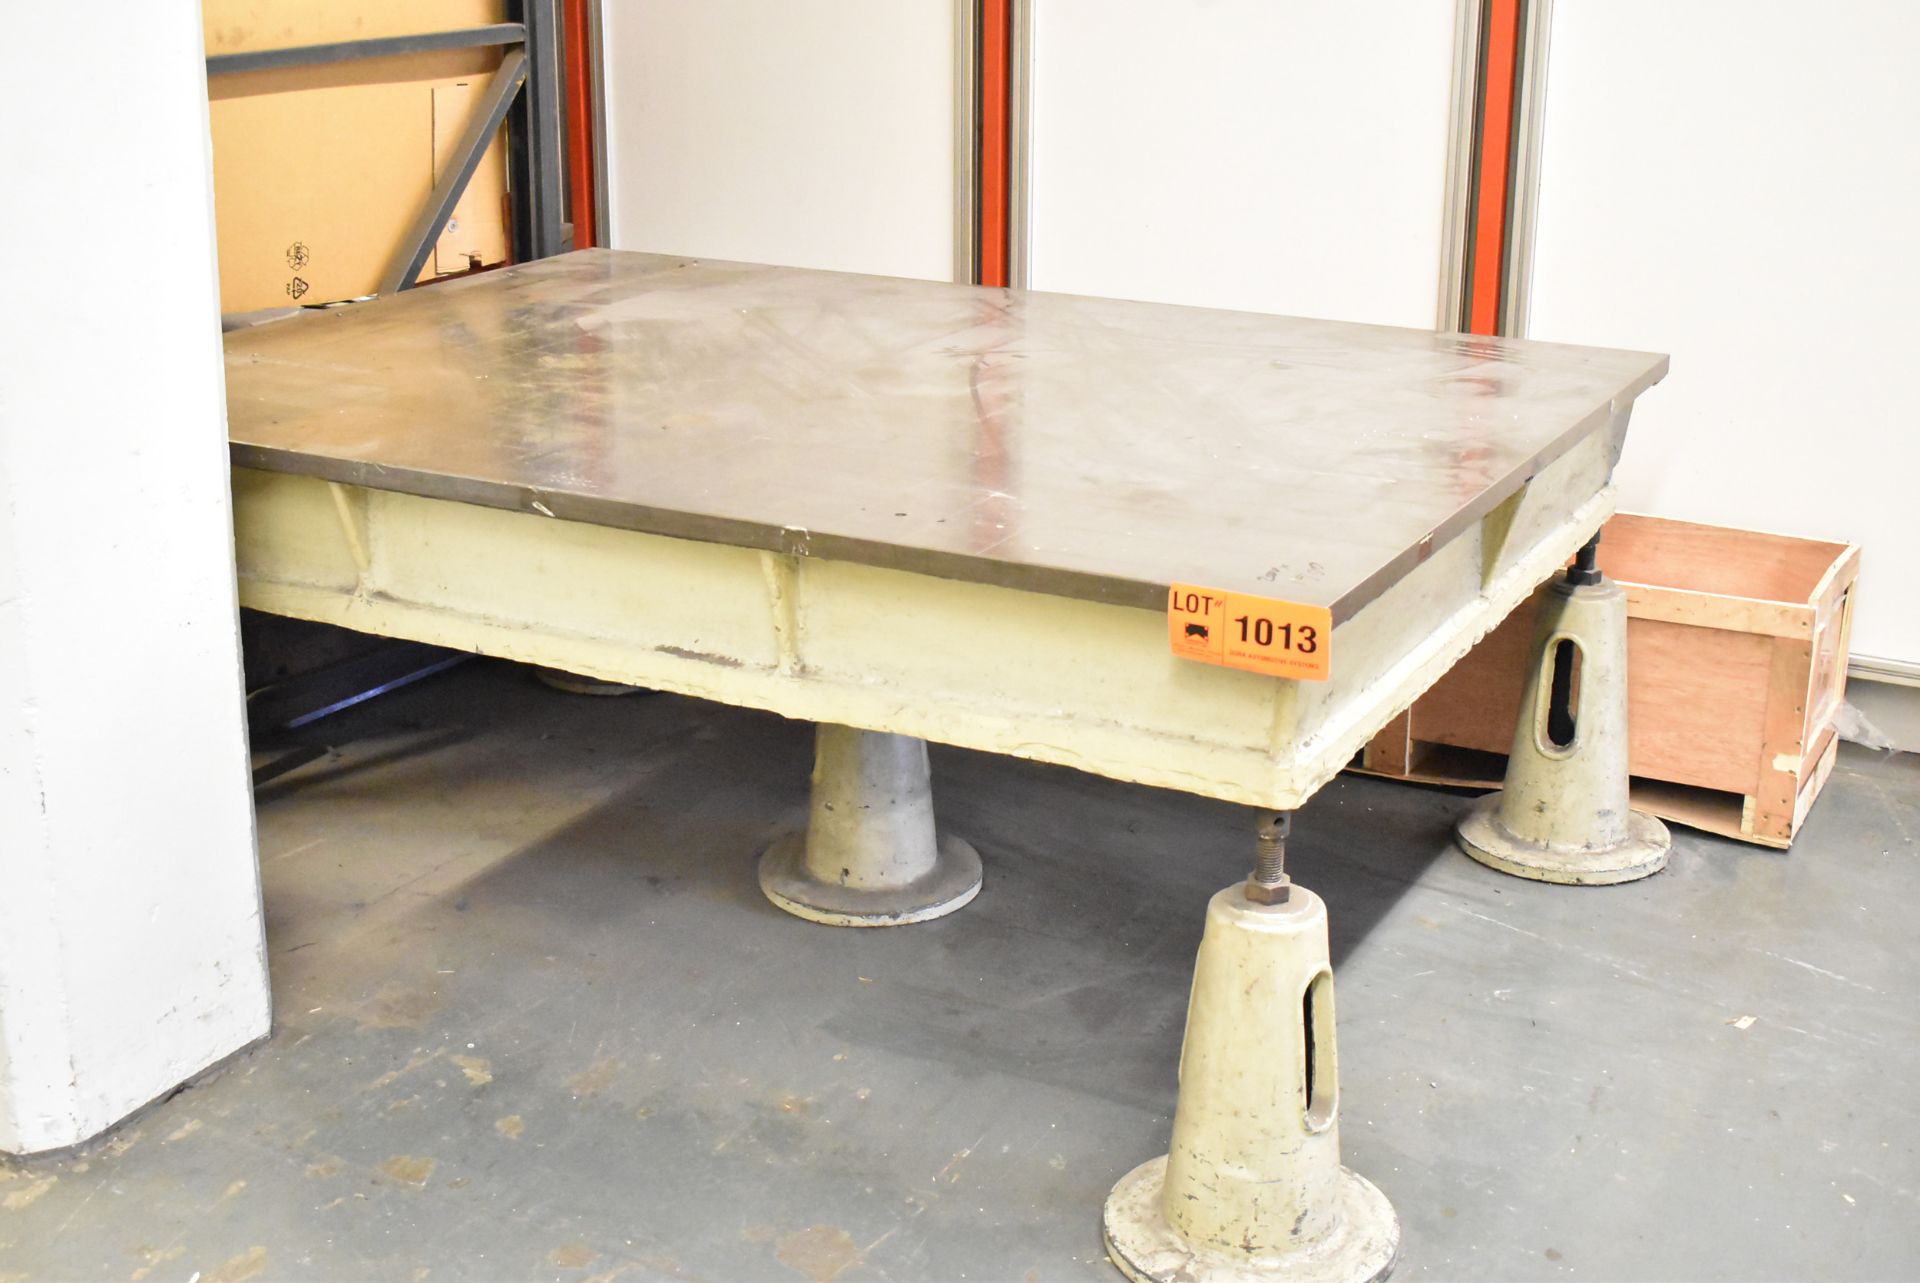 2000 MM X 1500 MM X 150 MM STEEL LAYOUT TABLE (SEL) [Removal Fee = € 55 + applicable VAT - Gerritsen